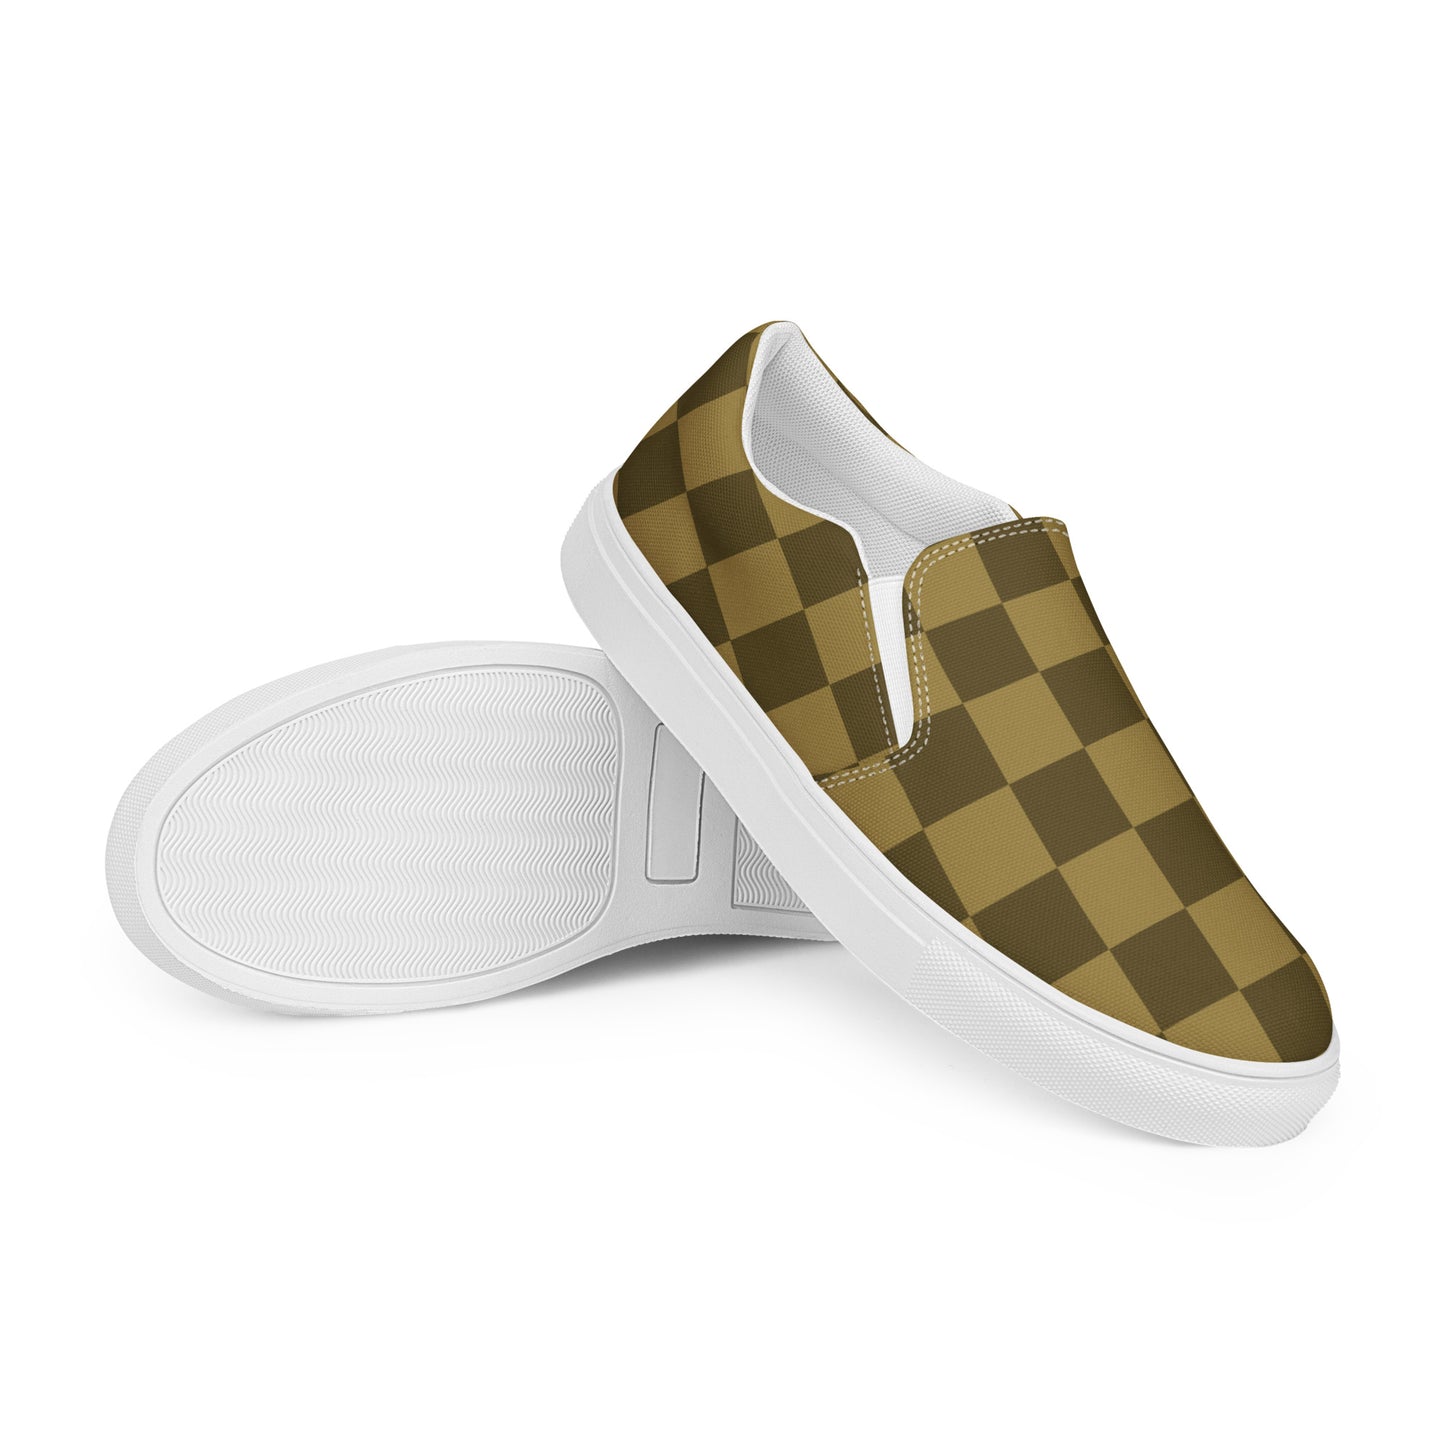 Wempy Dyocta Koto Signature Casual - Sustainably Made Men’s slip-on canvas shoes